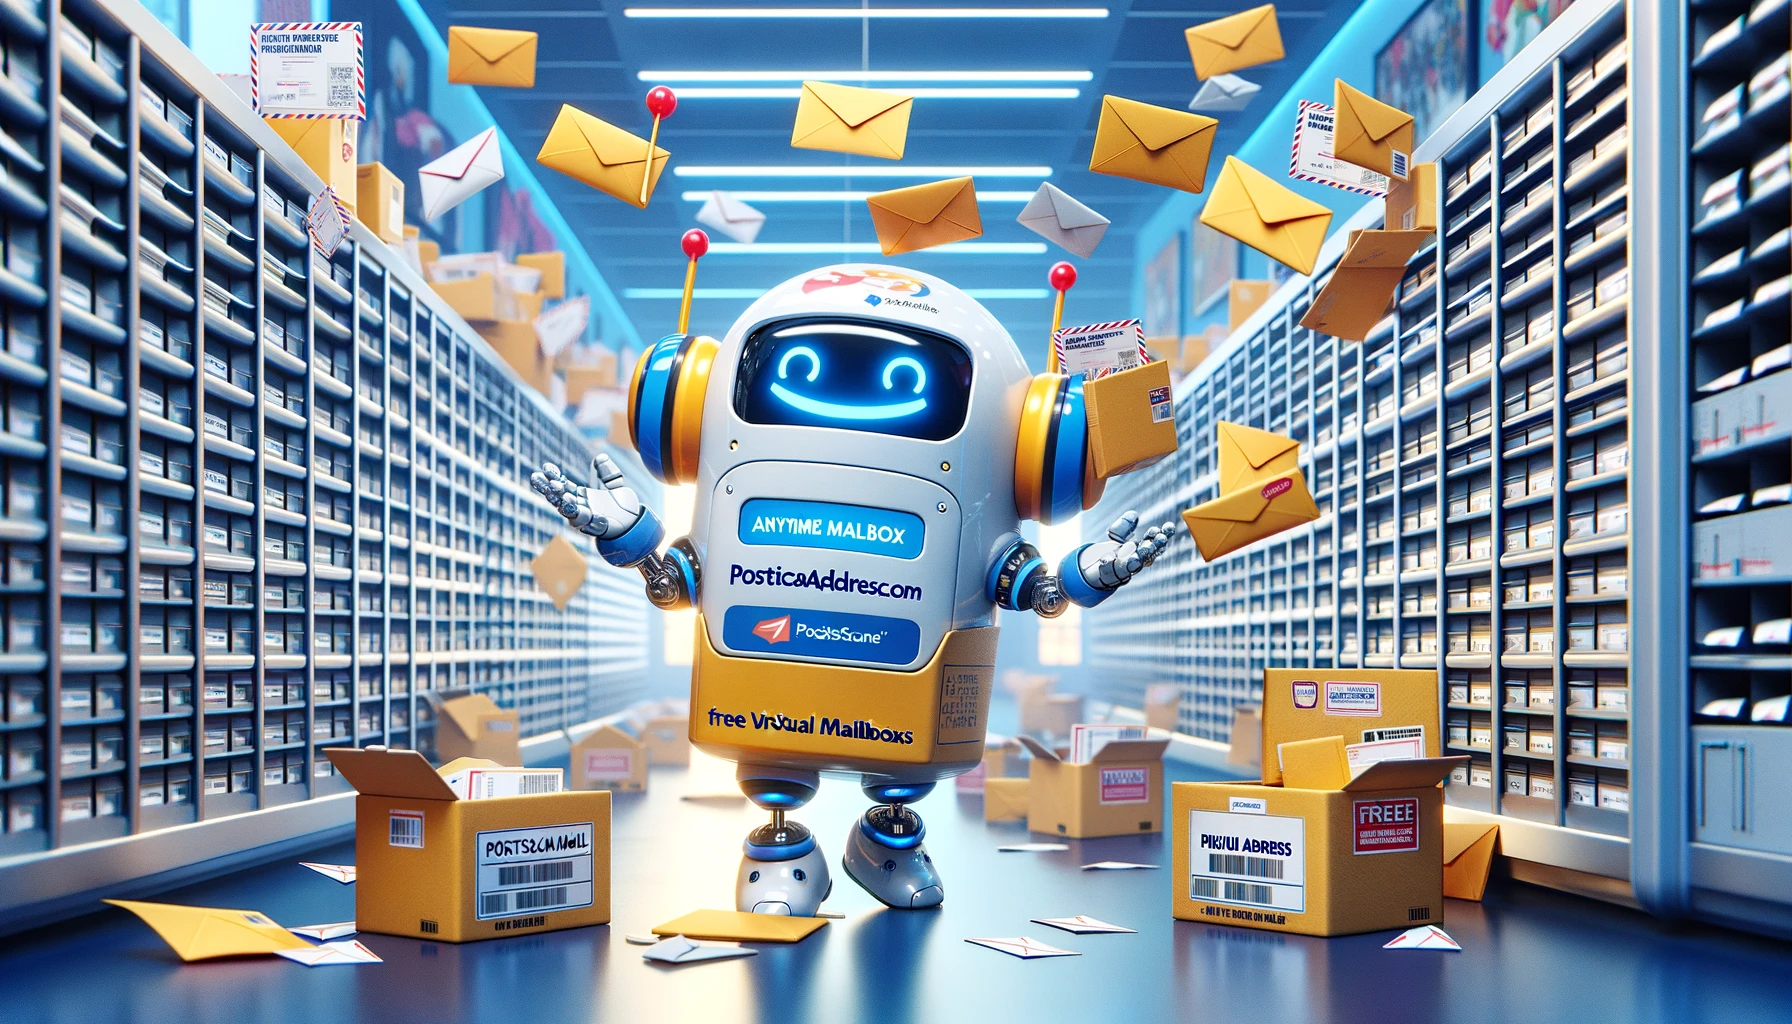 Cheerful mail robot juggling envelopes and packages in a futuristic mailroom filled with virtual mailboxes labeled 'Anytime Mailbox,' 'PostScan Mail,' 'PhysicalAddress.com,' and 'USA2Me.'